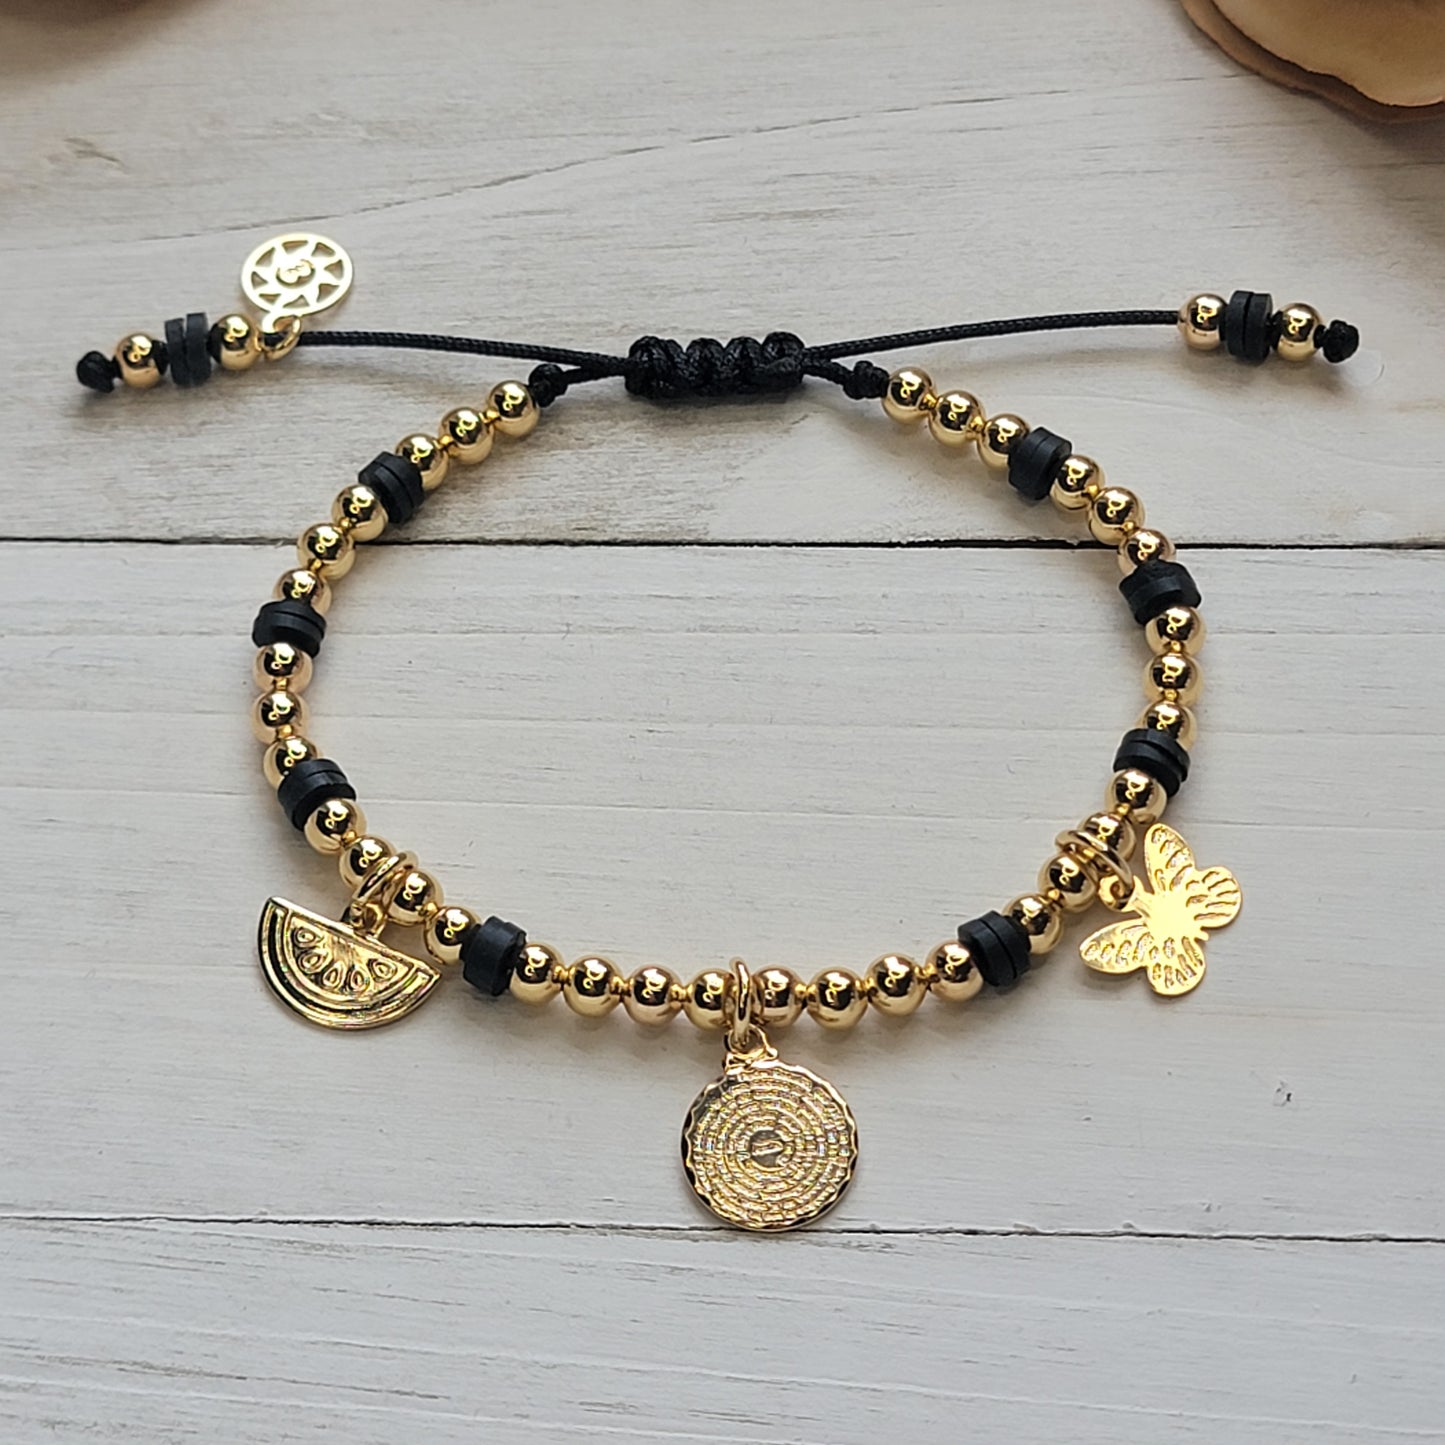 Black Beaded Bracelet with Charms